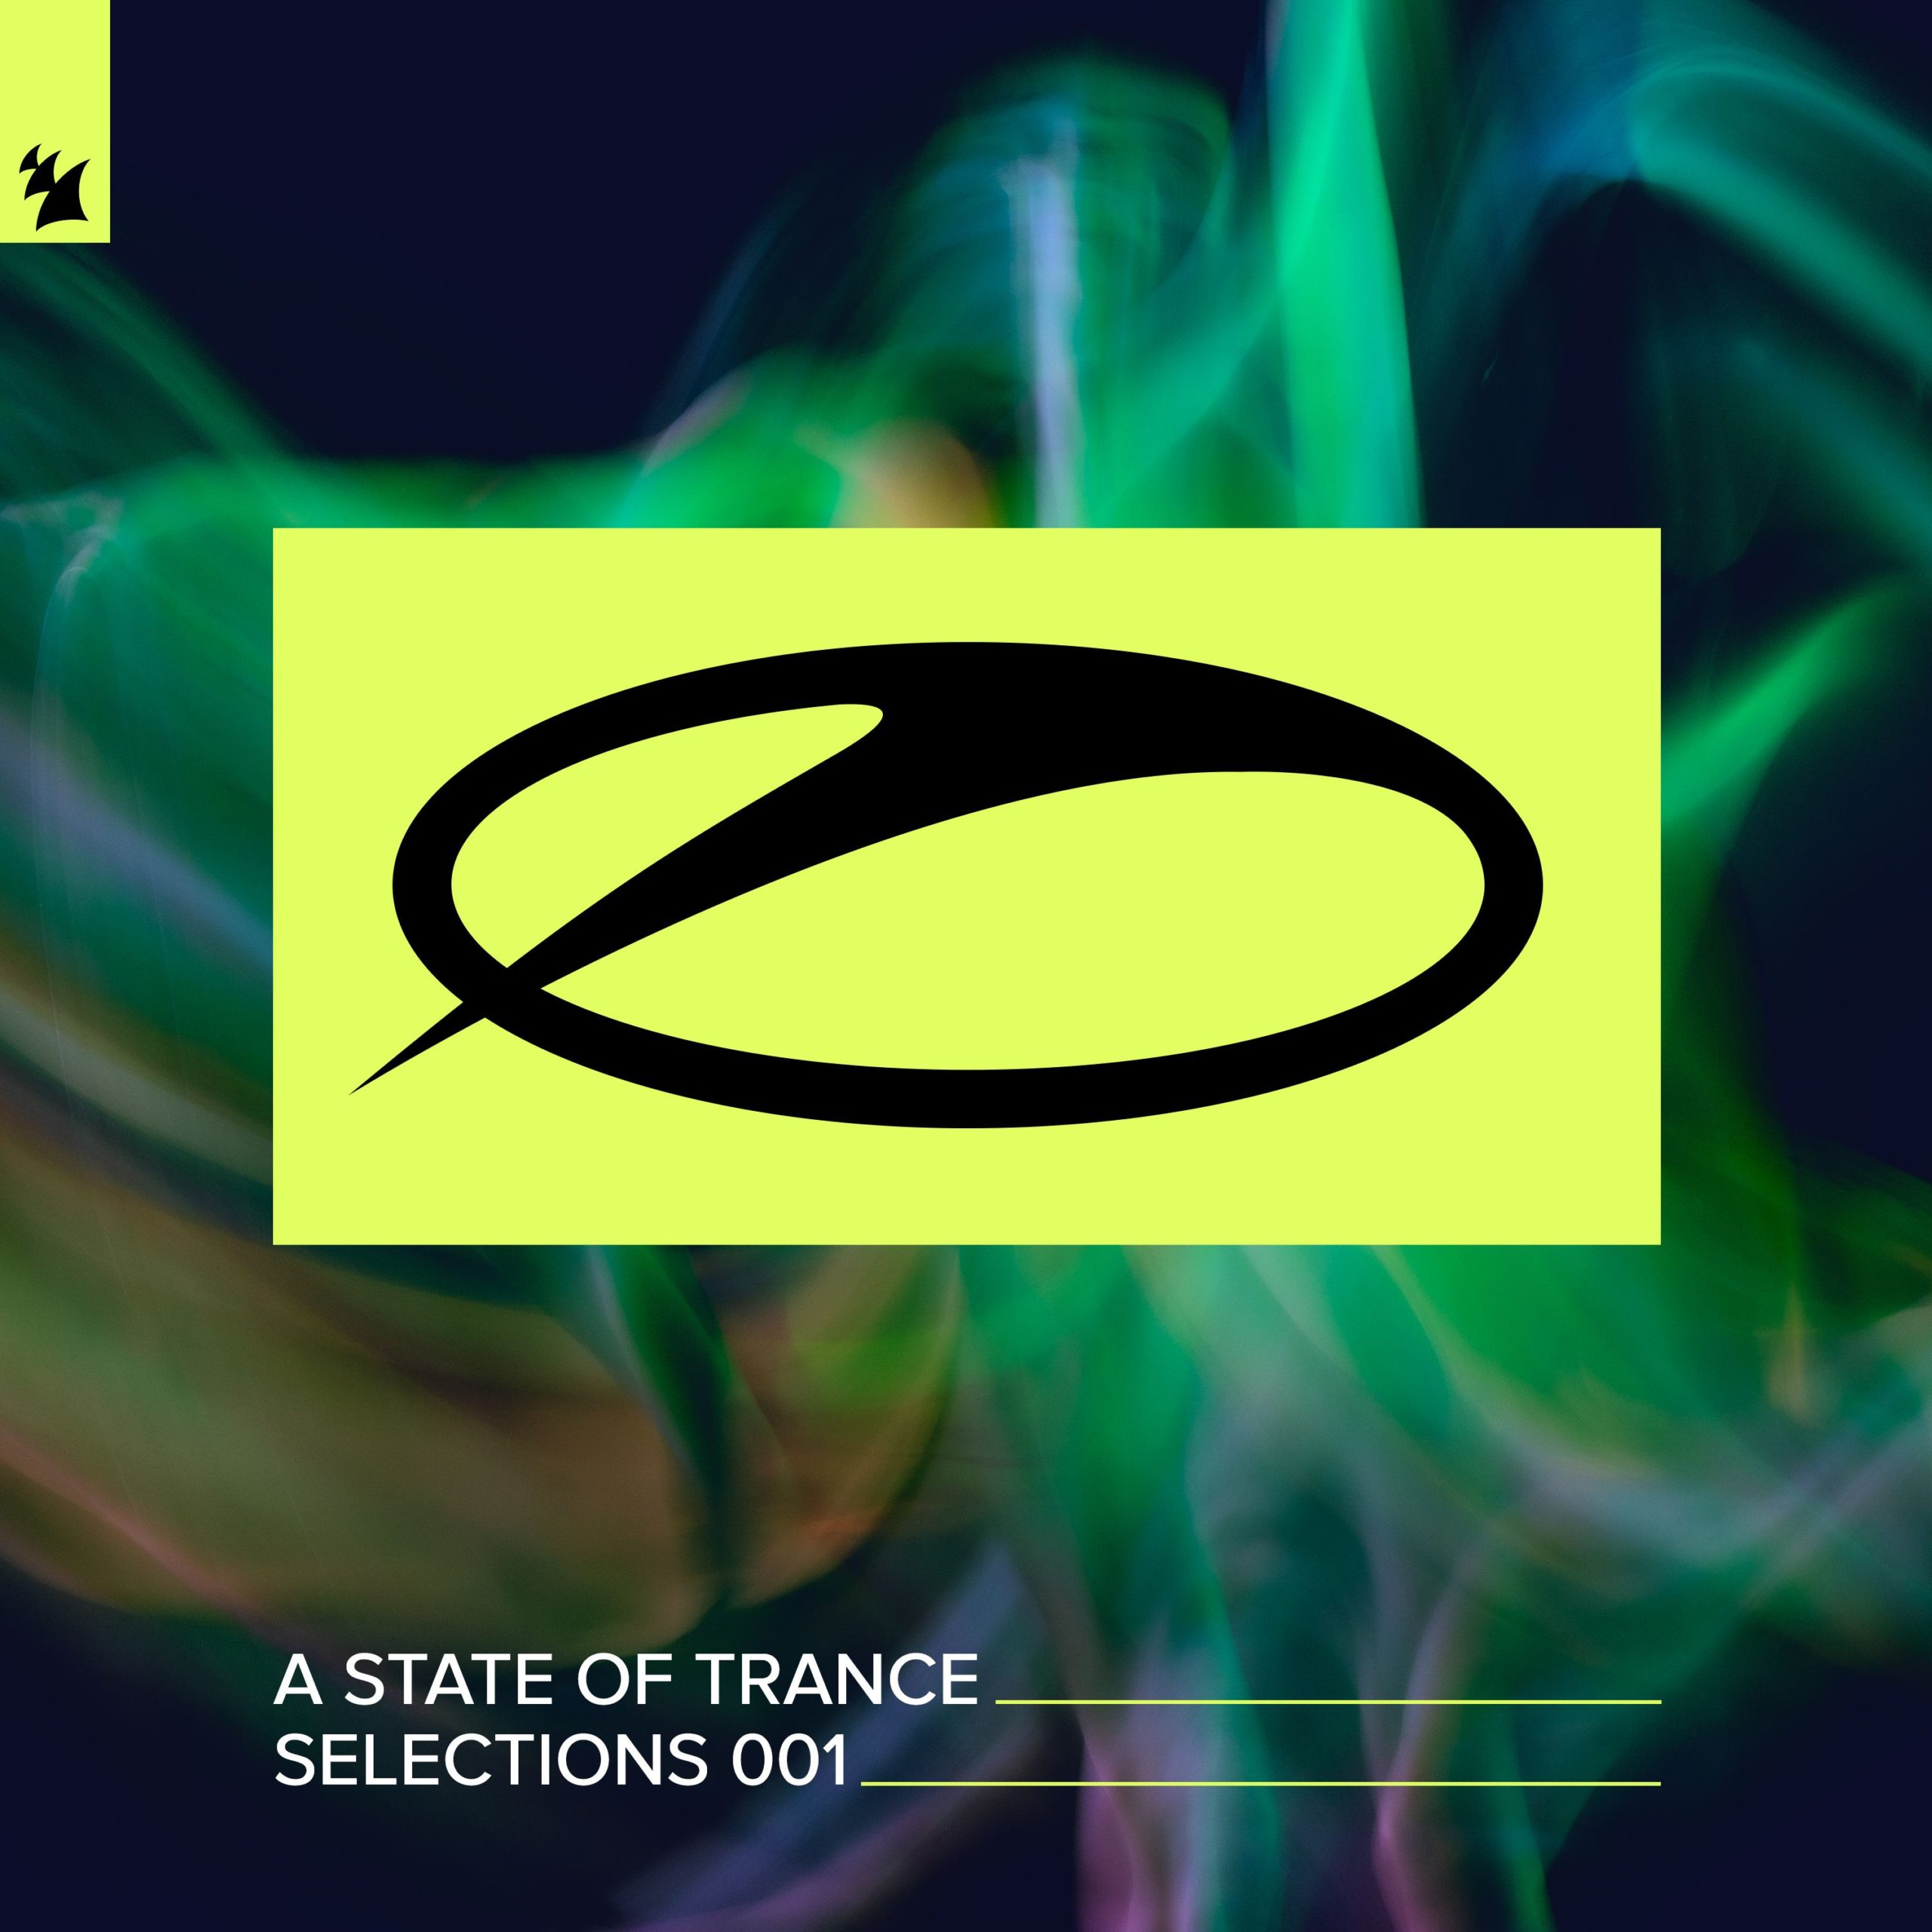 Various Artists presents A State Of Trance – Selections 001 on Armada Music